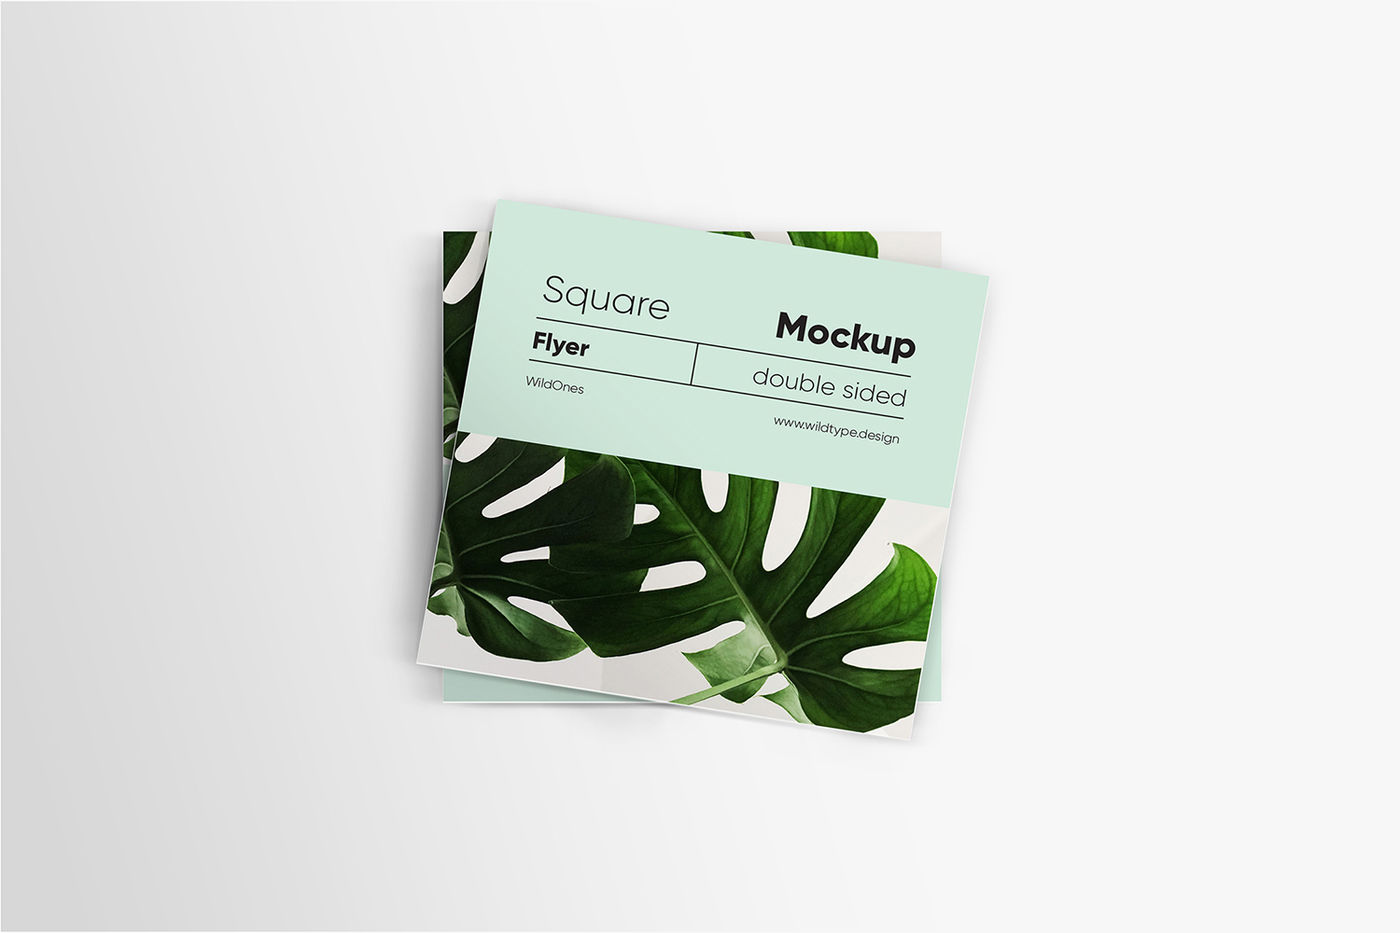 Download Square Flyer Mockup By WildOnes | TheHungryJPEG.com